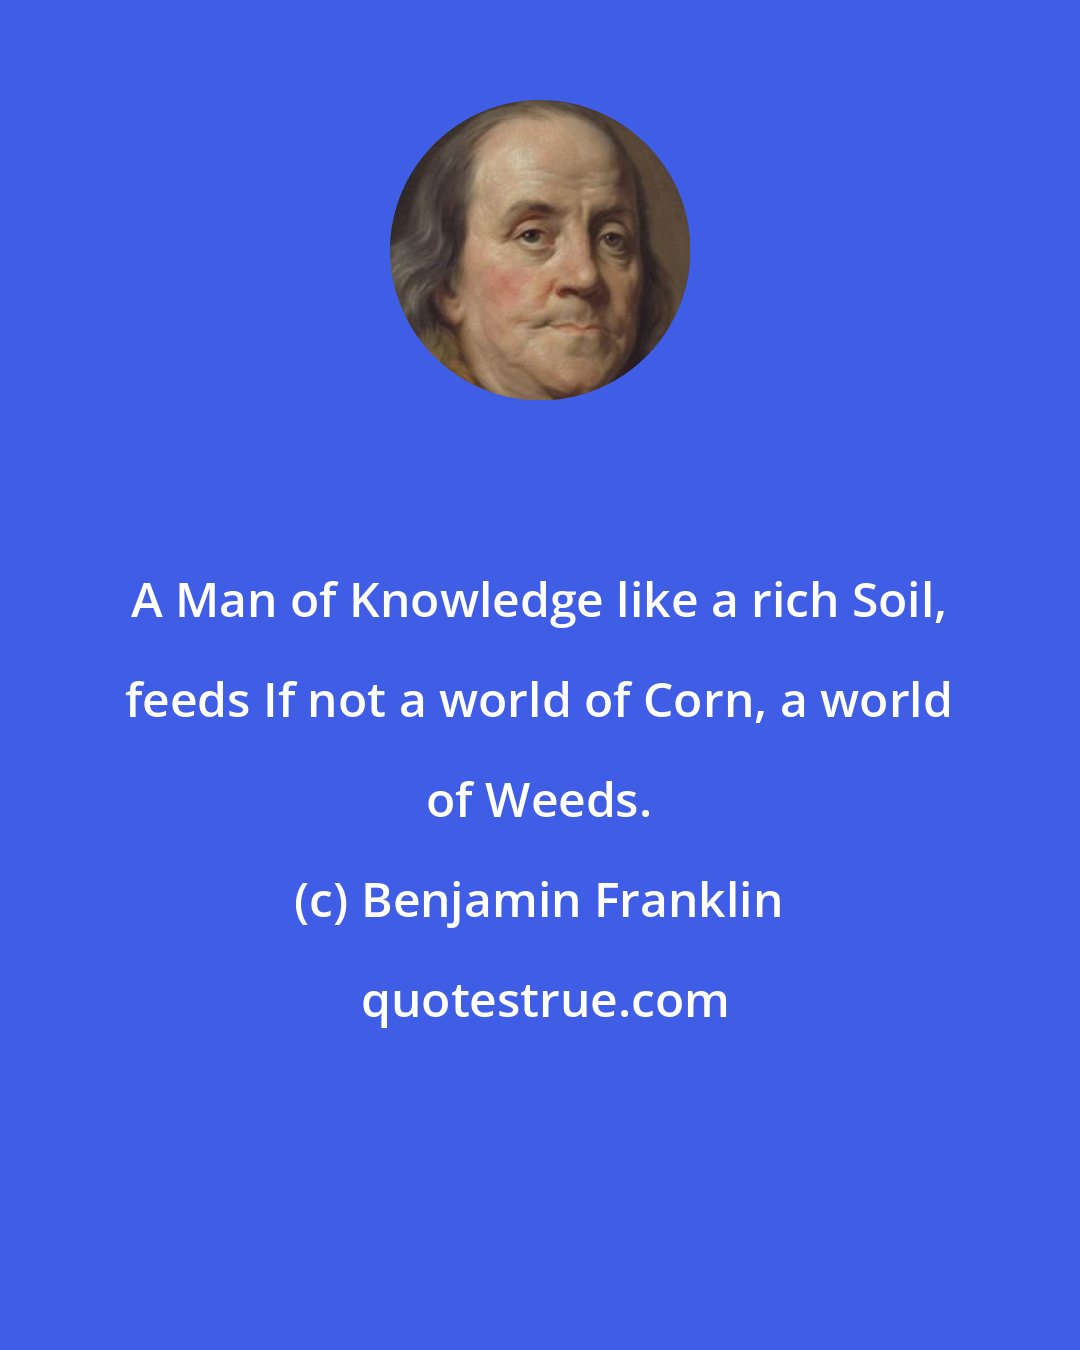 Benjamin Franklin: A Man of Knowledge like a rich Soil, feeds If not a world of Corn, a world of Weeds.